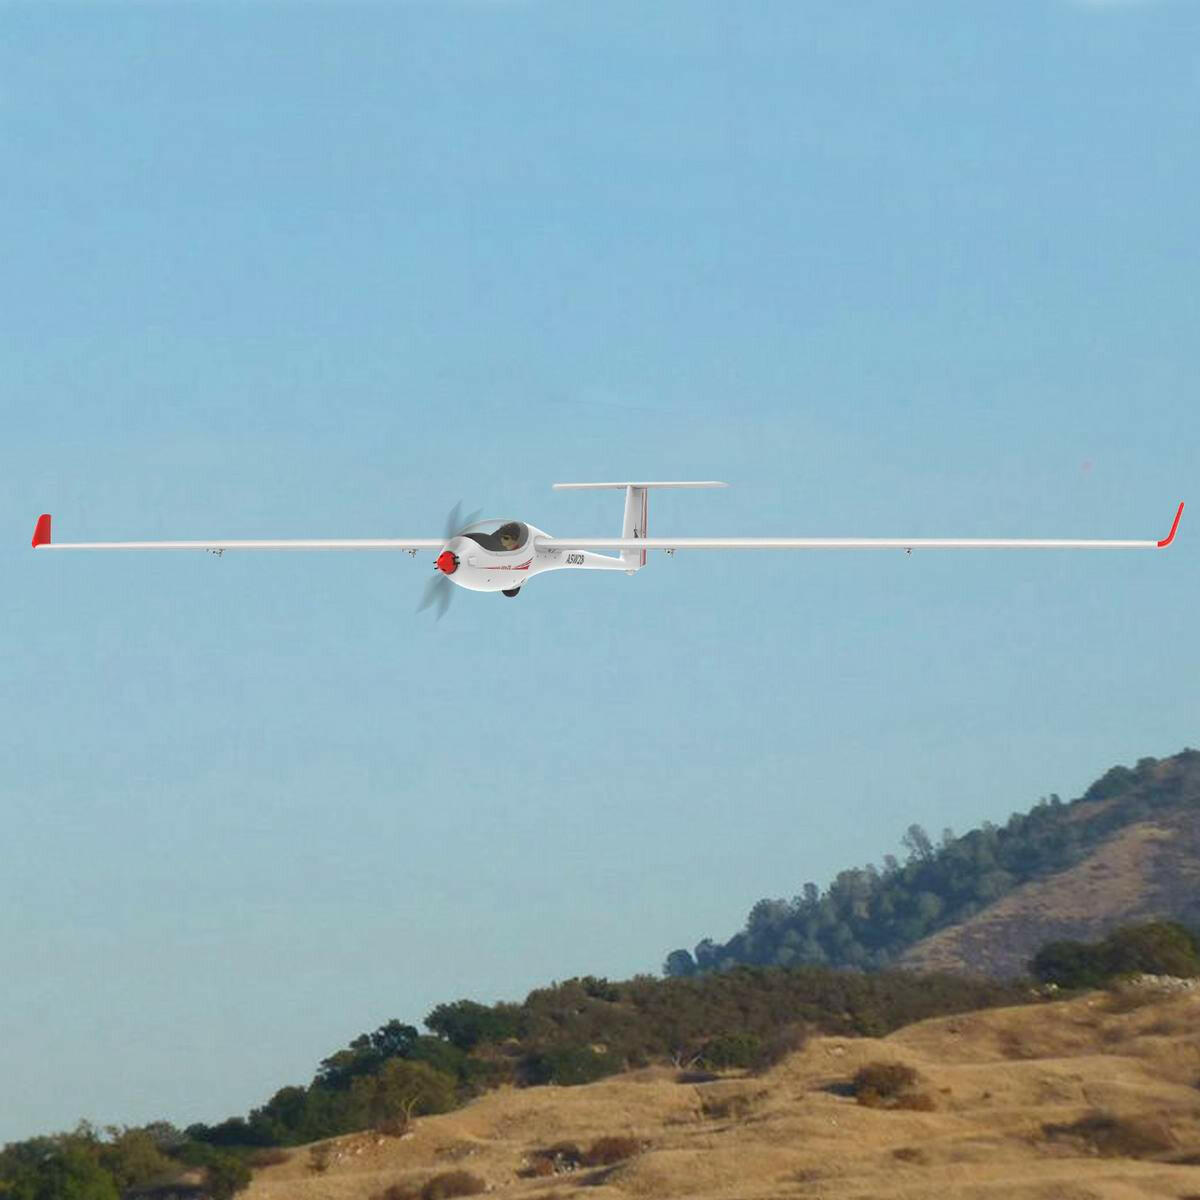 VOLANTEXRC ASW28 2.6 Meters 5-Ch Professional RC Glider Brushless Scale Sailplane 759-1.